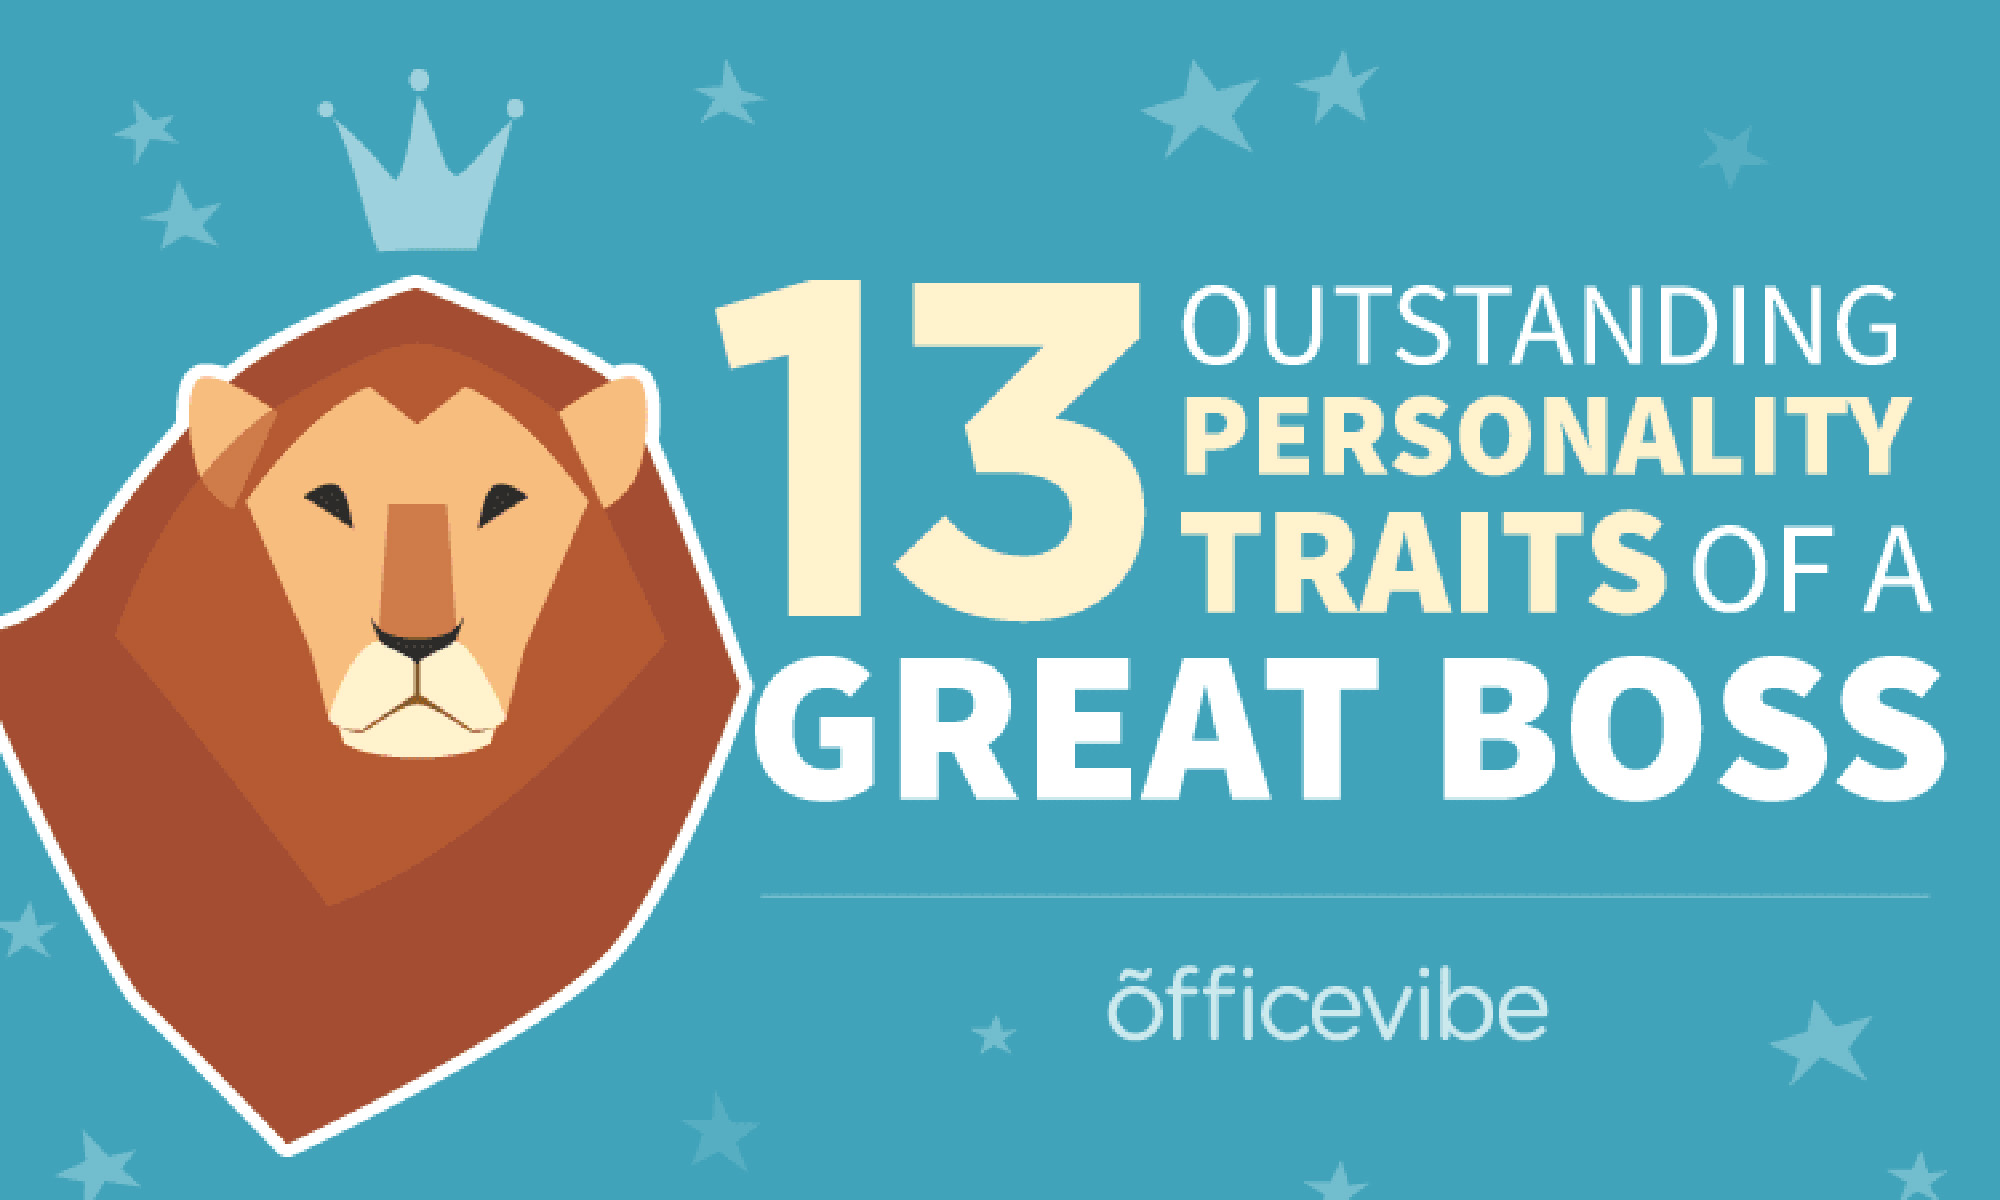 13 Outstanding Personality Traits of a Great Boss